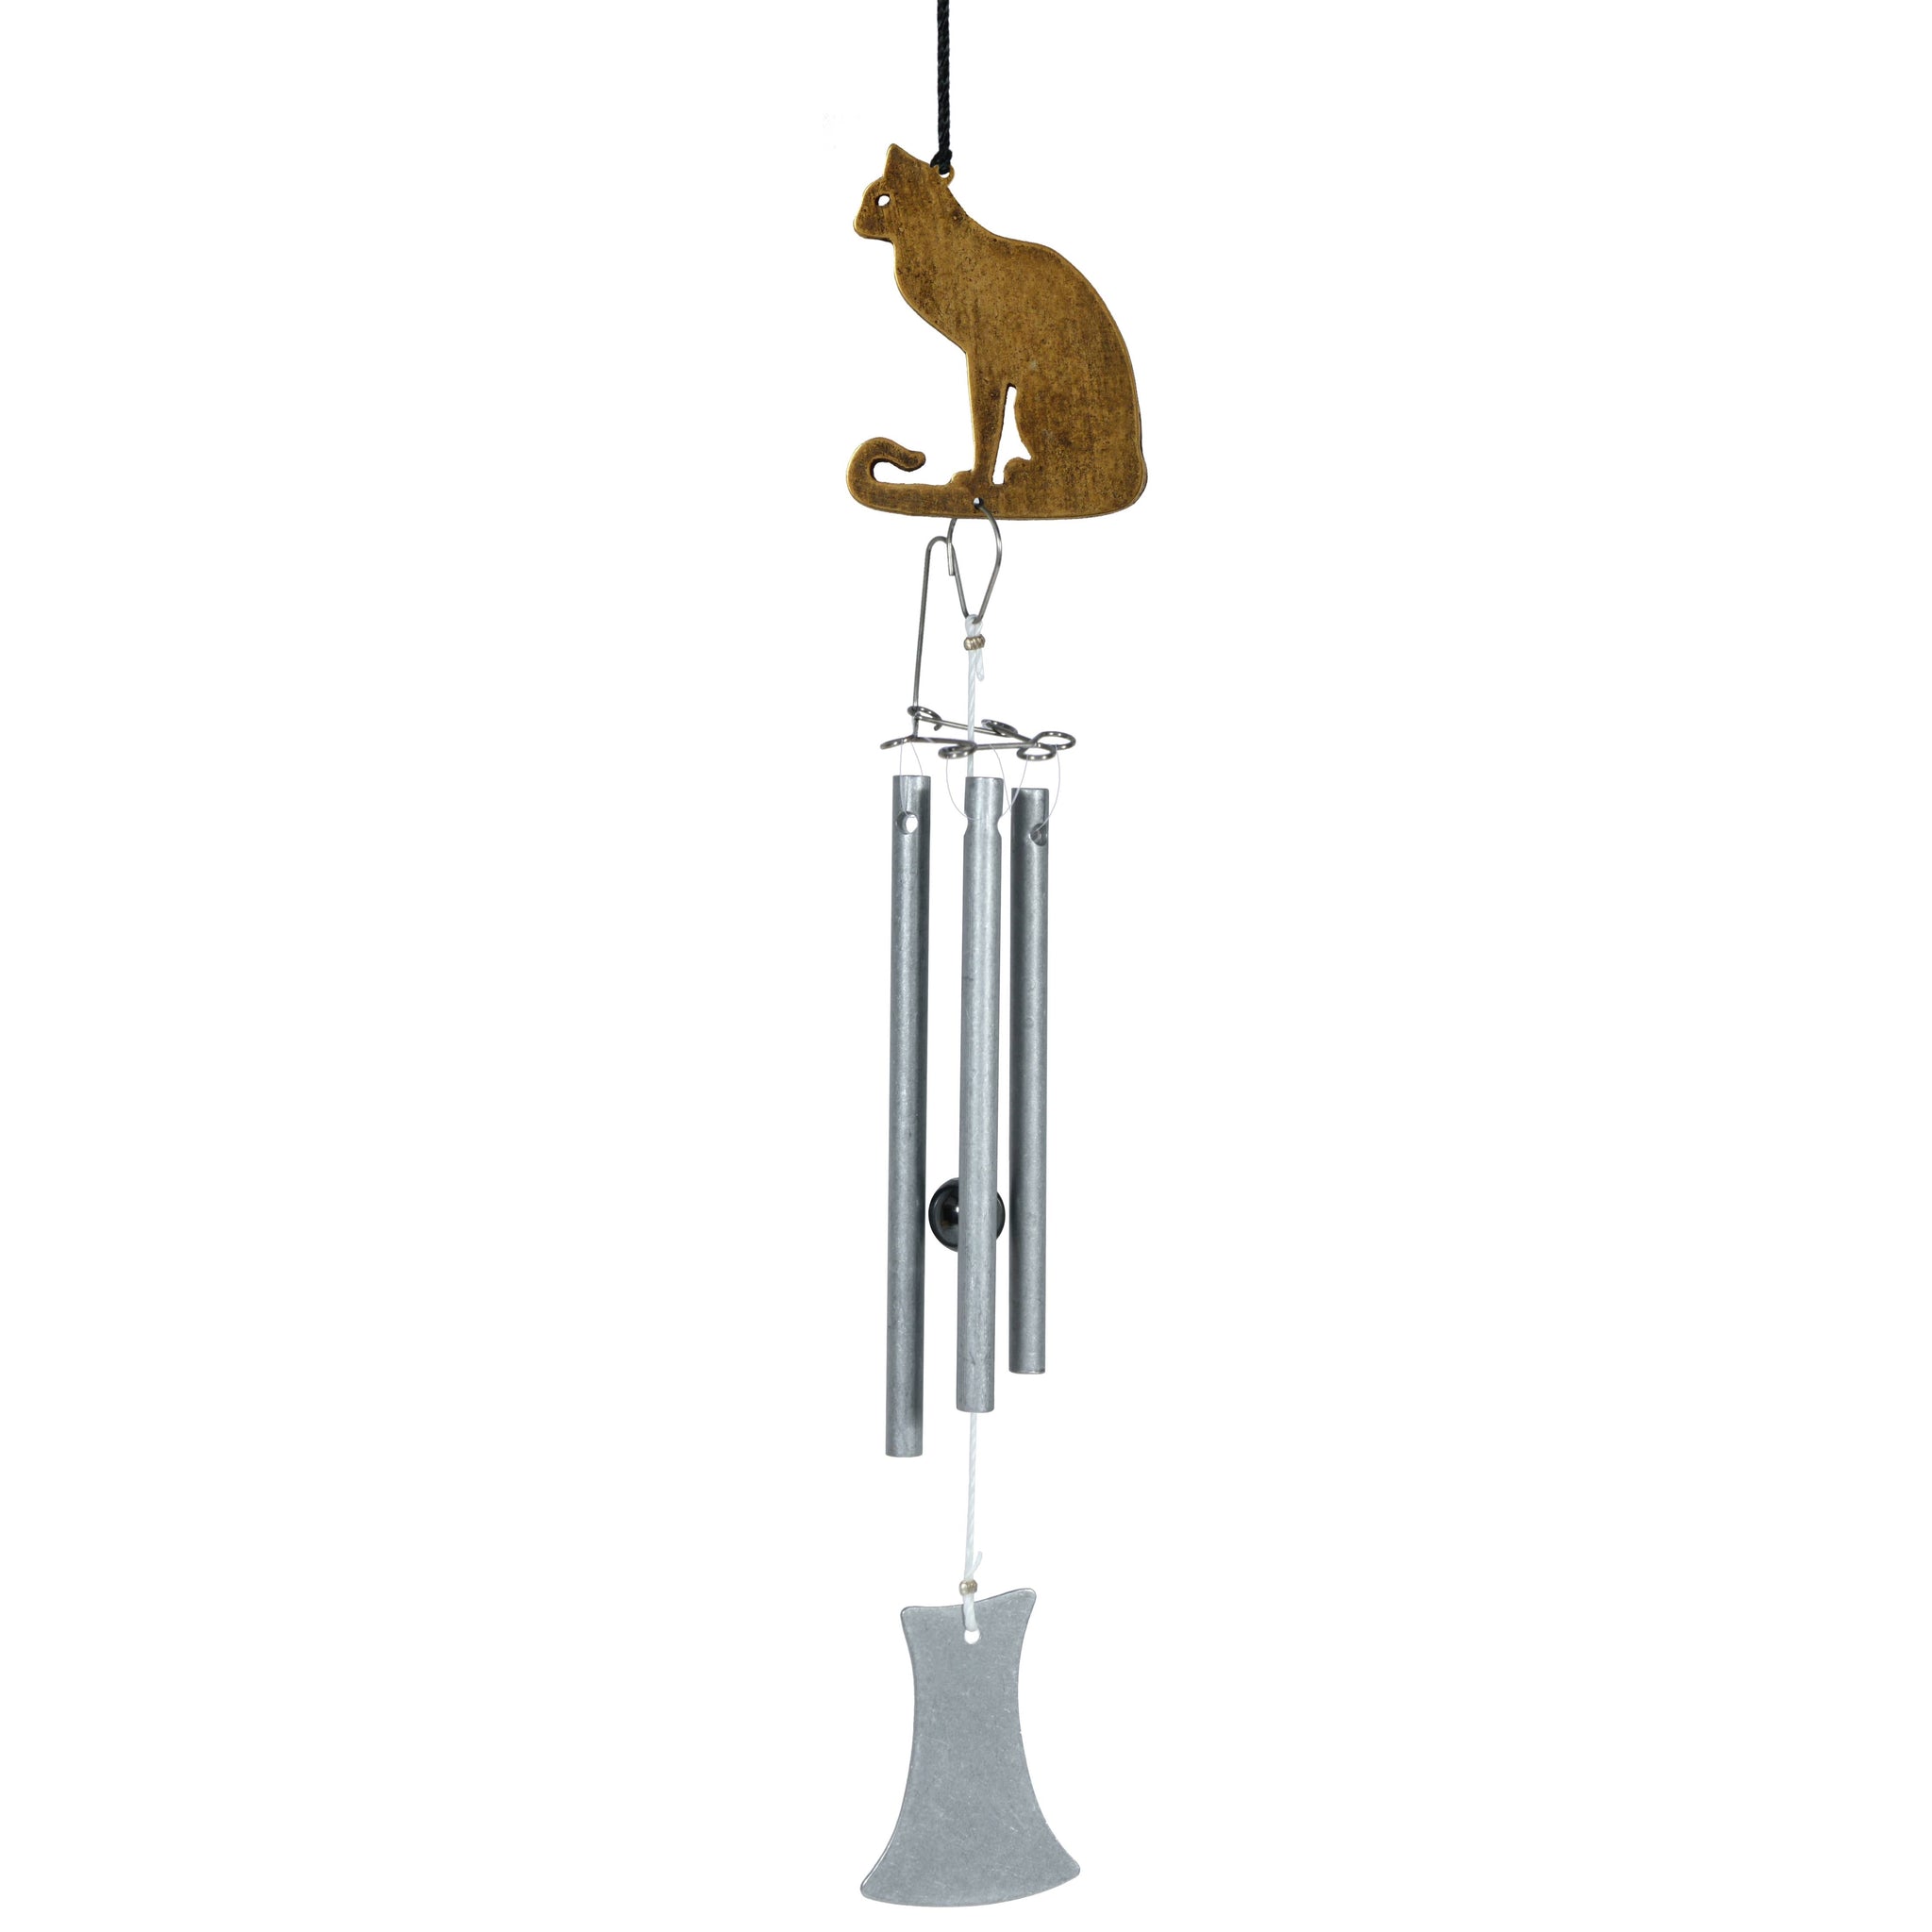 Jacob's Musical Little Piper Chime Cat